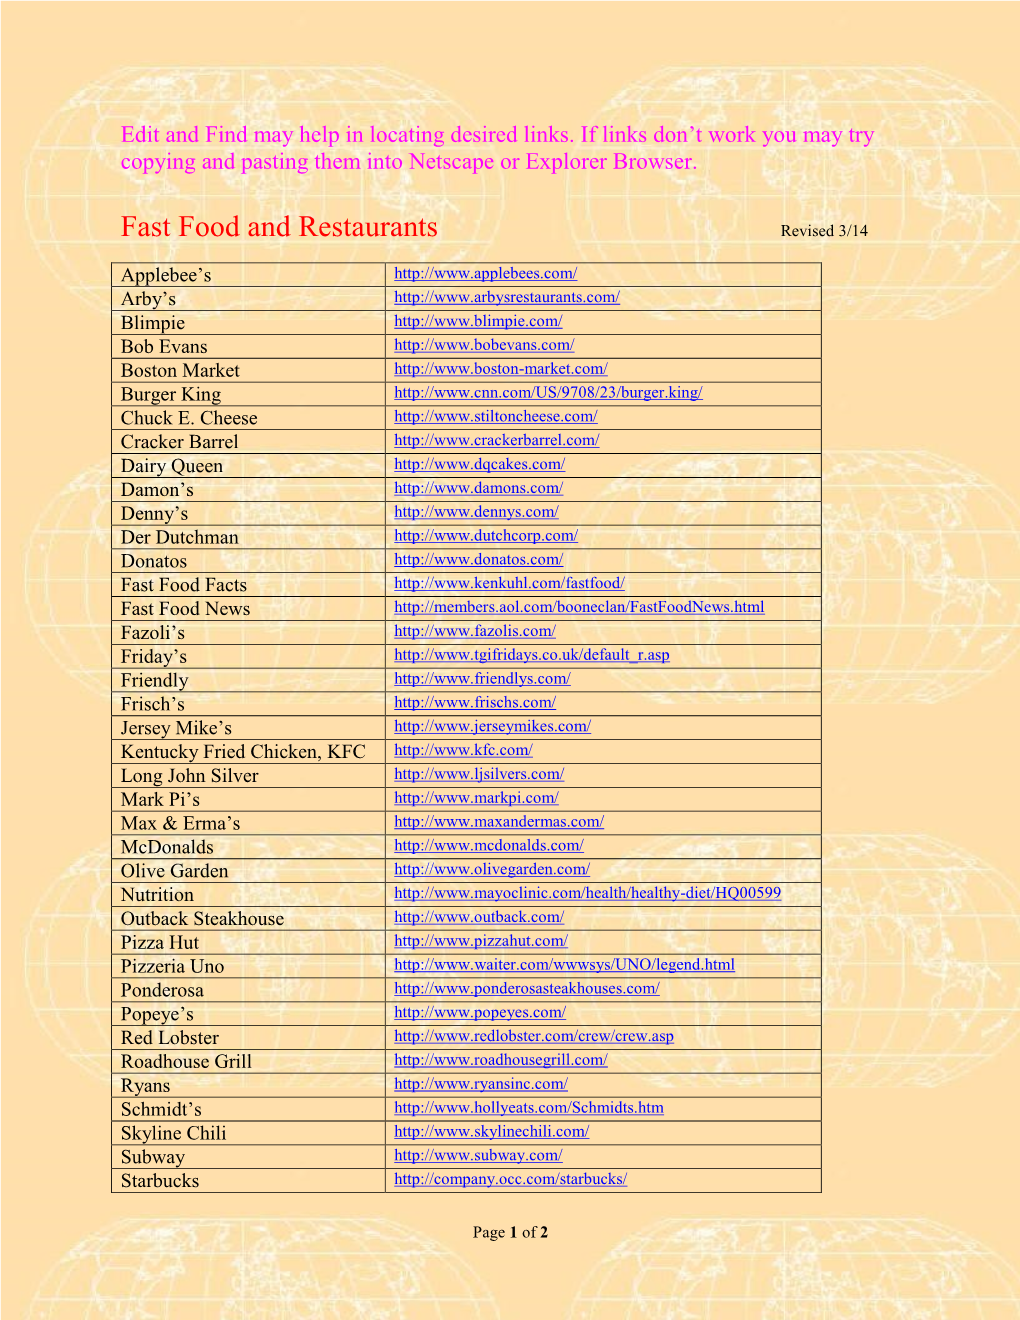 Fast Food and Restaurants Revised 3/14